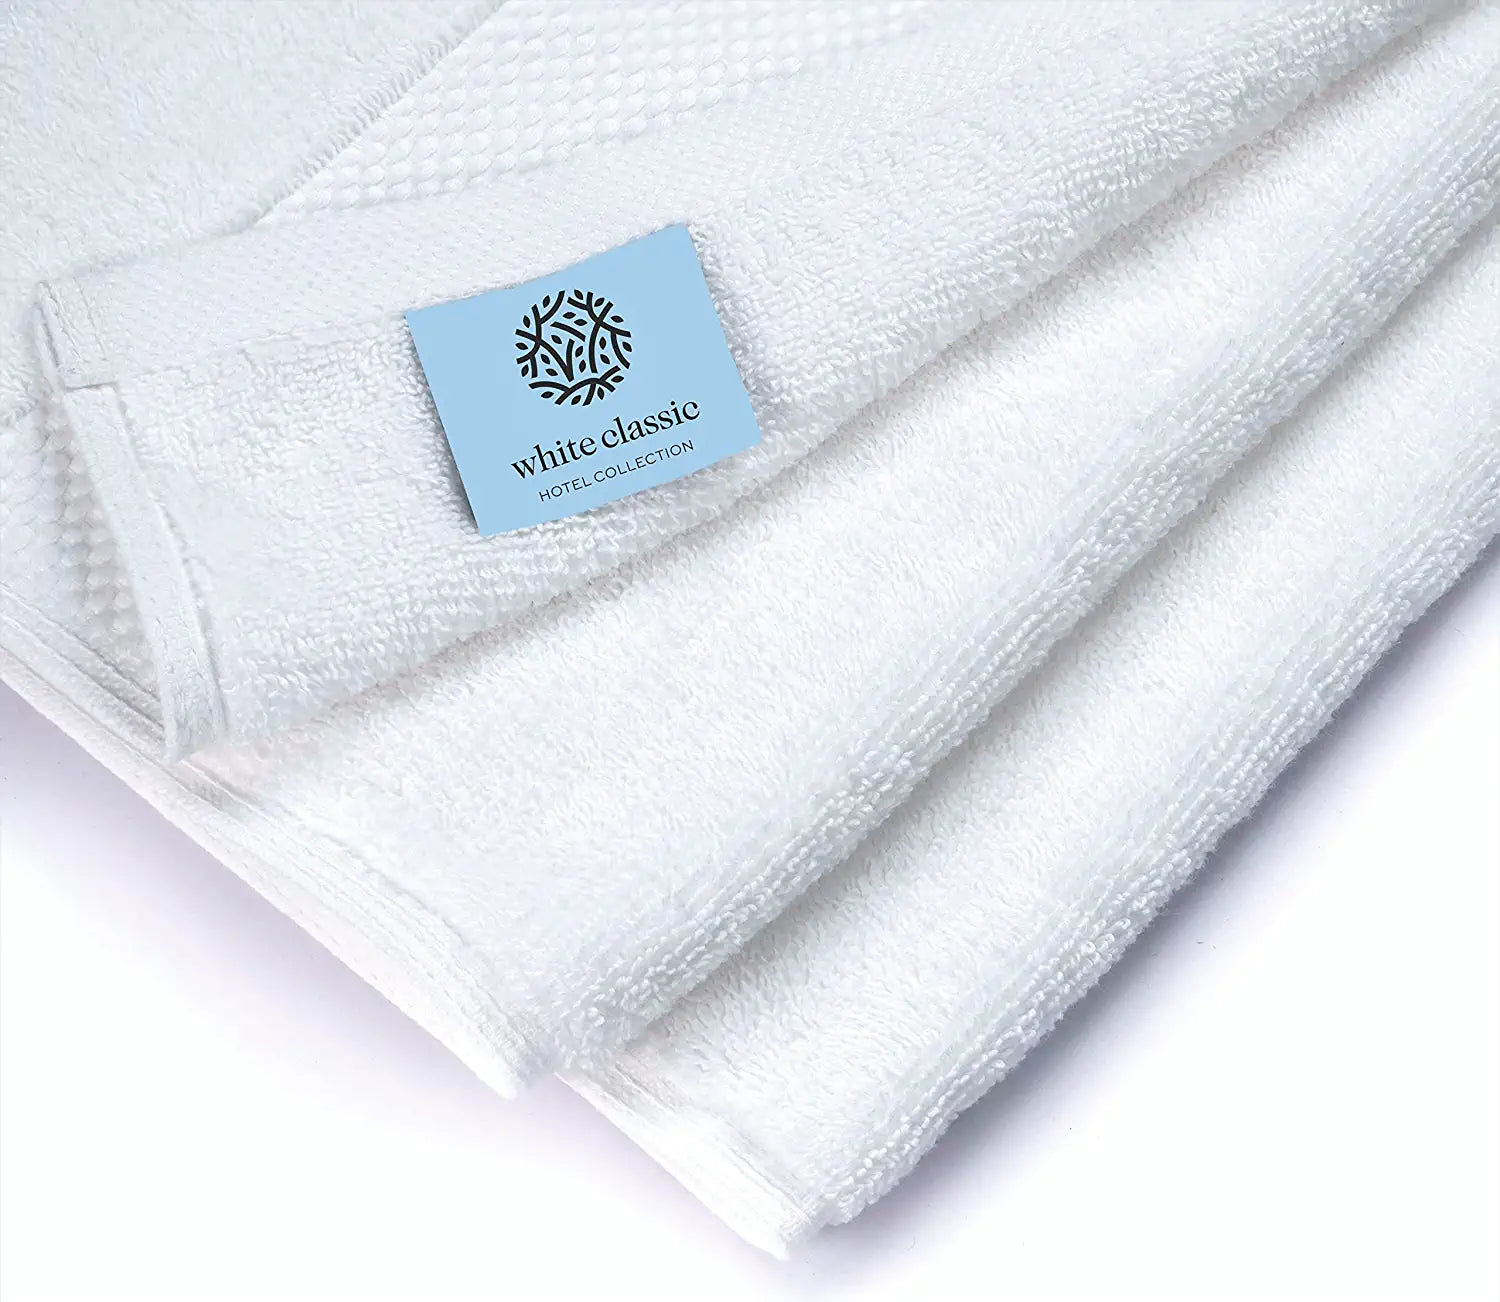 White Classic Luxury Cotton Bath Towels Large - | Highly Absorbent Hotel  spa Collection Bathroom Towel | 27x54 Inch | Set of 4 (Light Grey, 4)